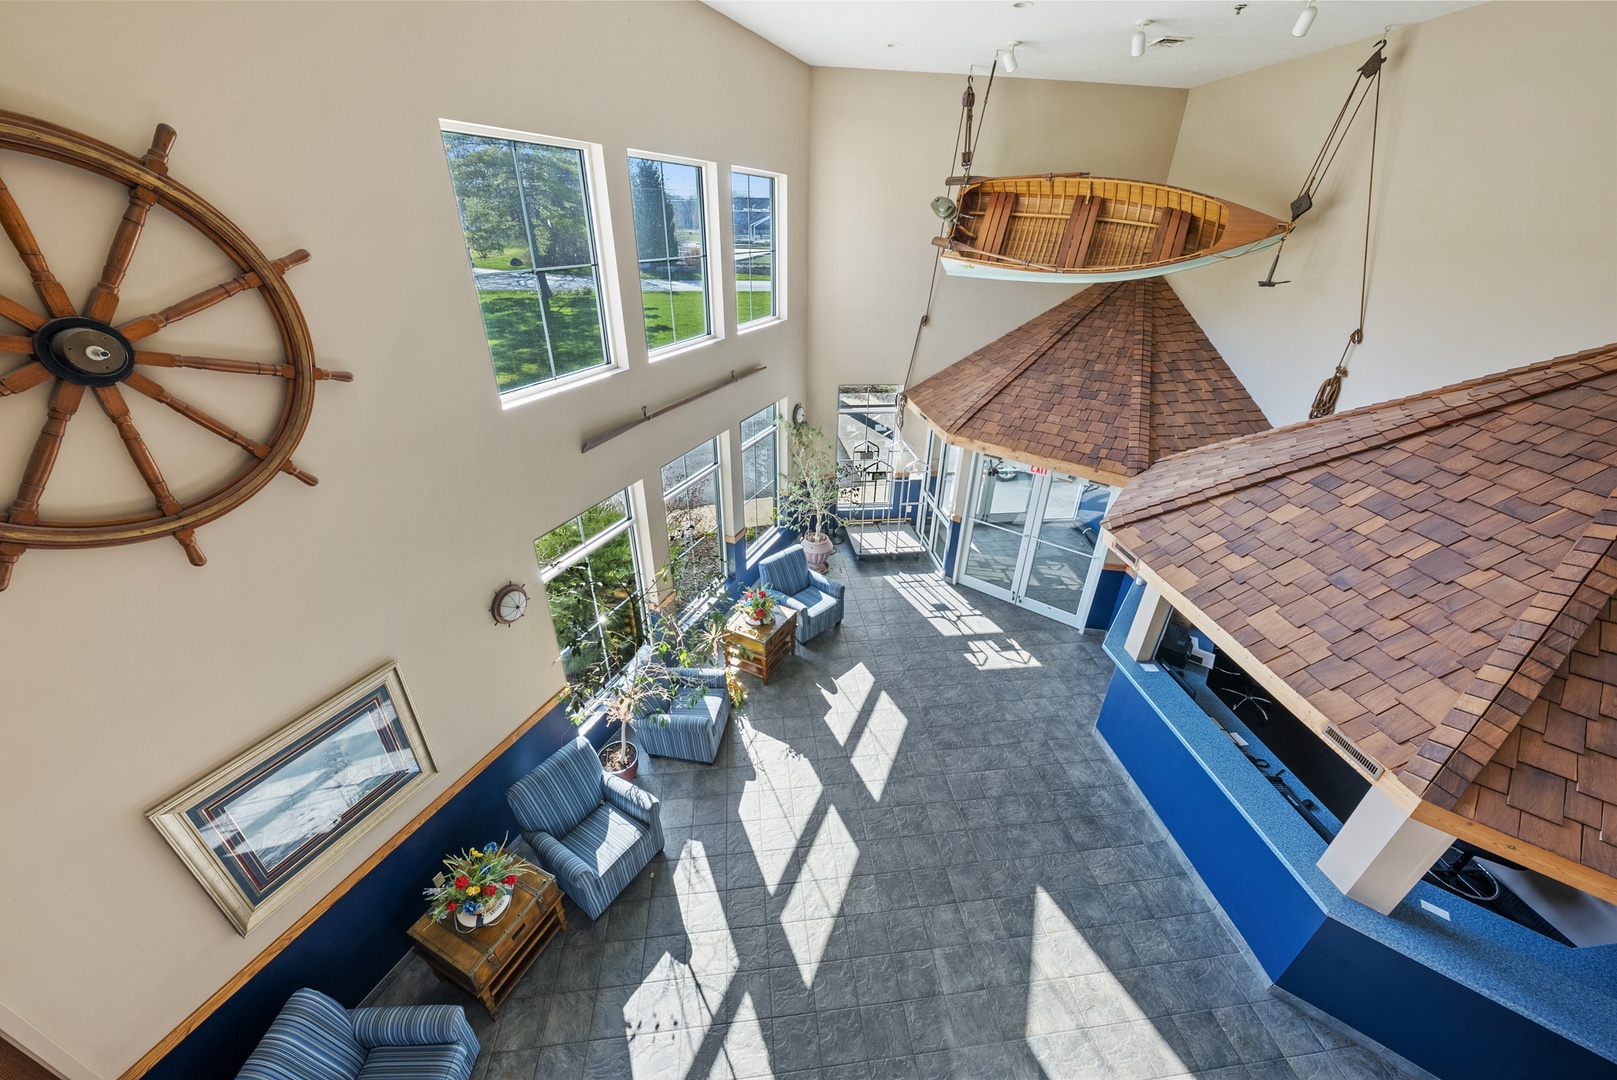 "Nautical Charm and Serenity Await at Our Spacious Put-In-Bay Retreat